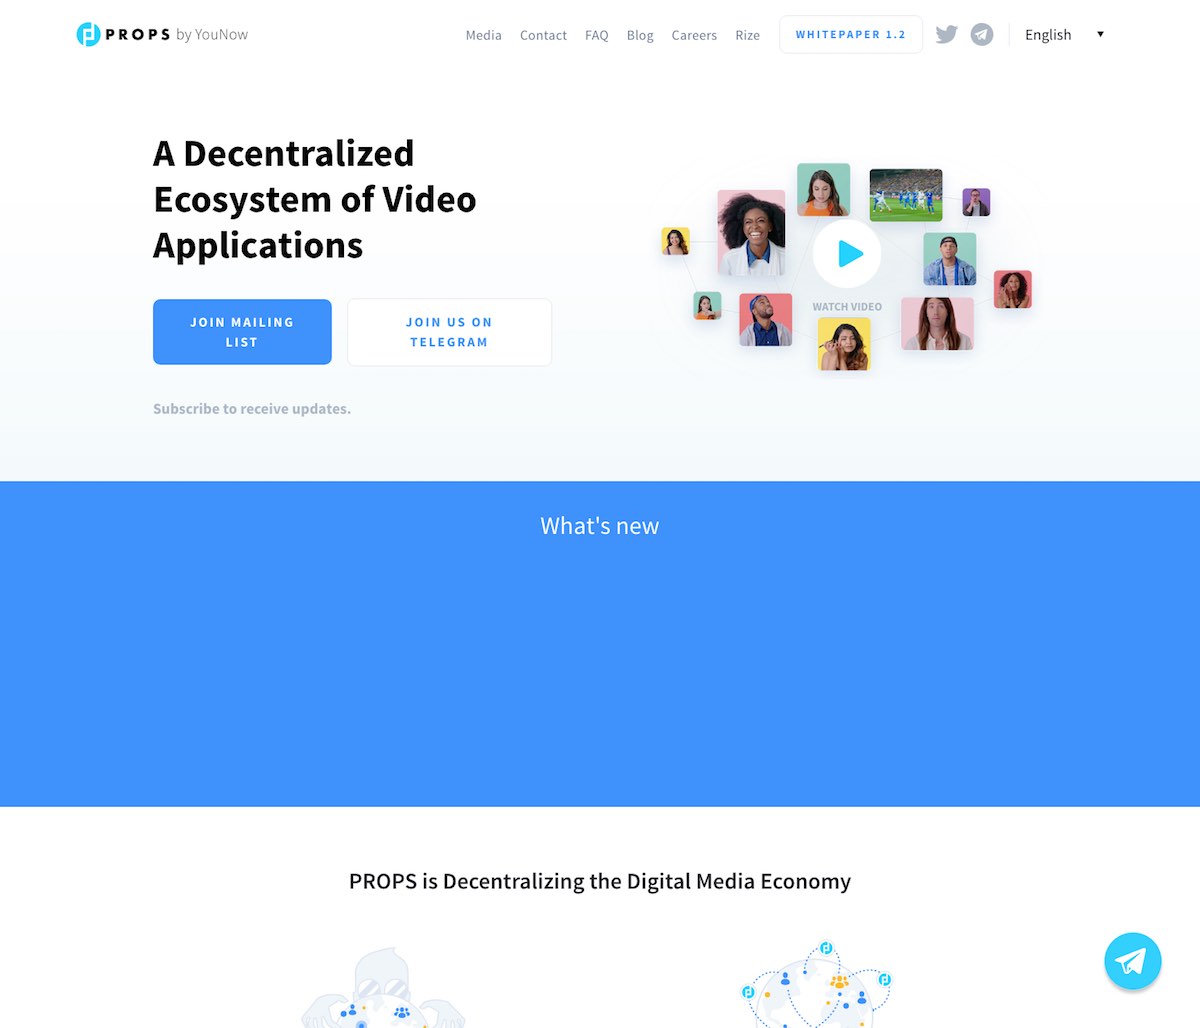 A Decentralized Ecosystem of Video Applications